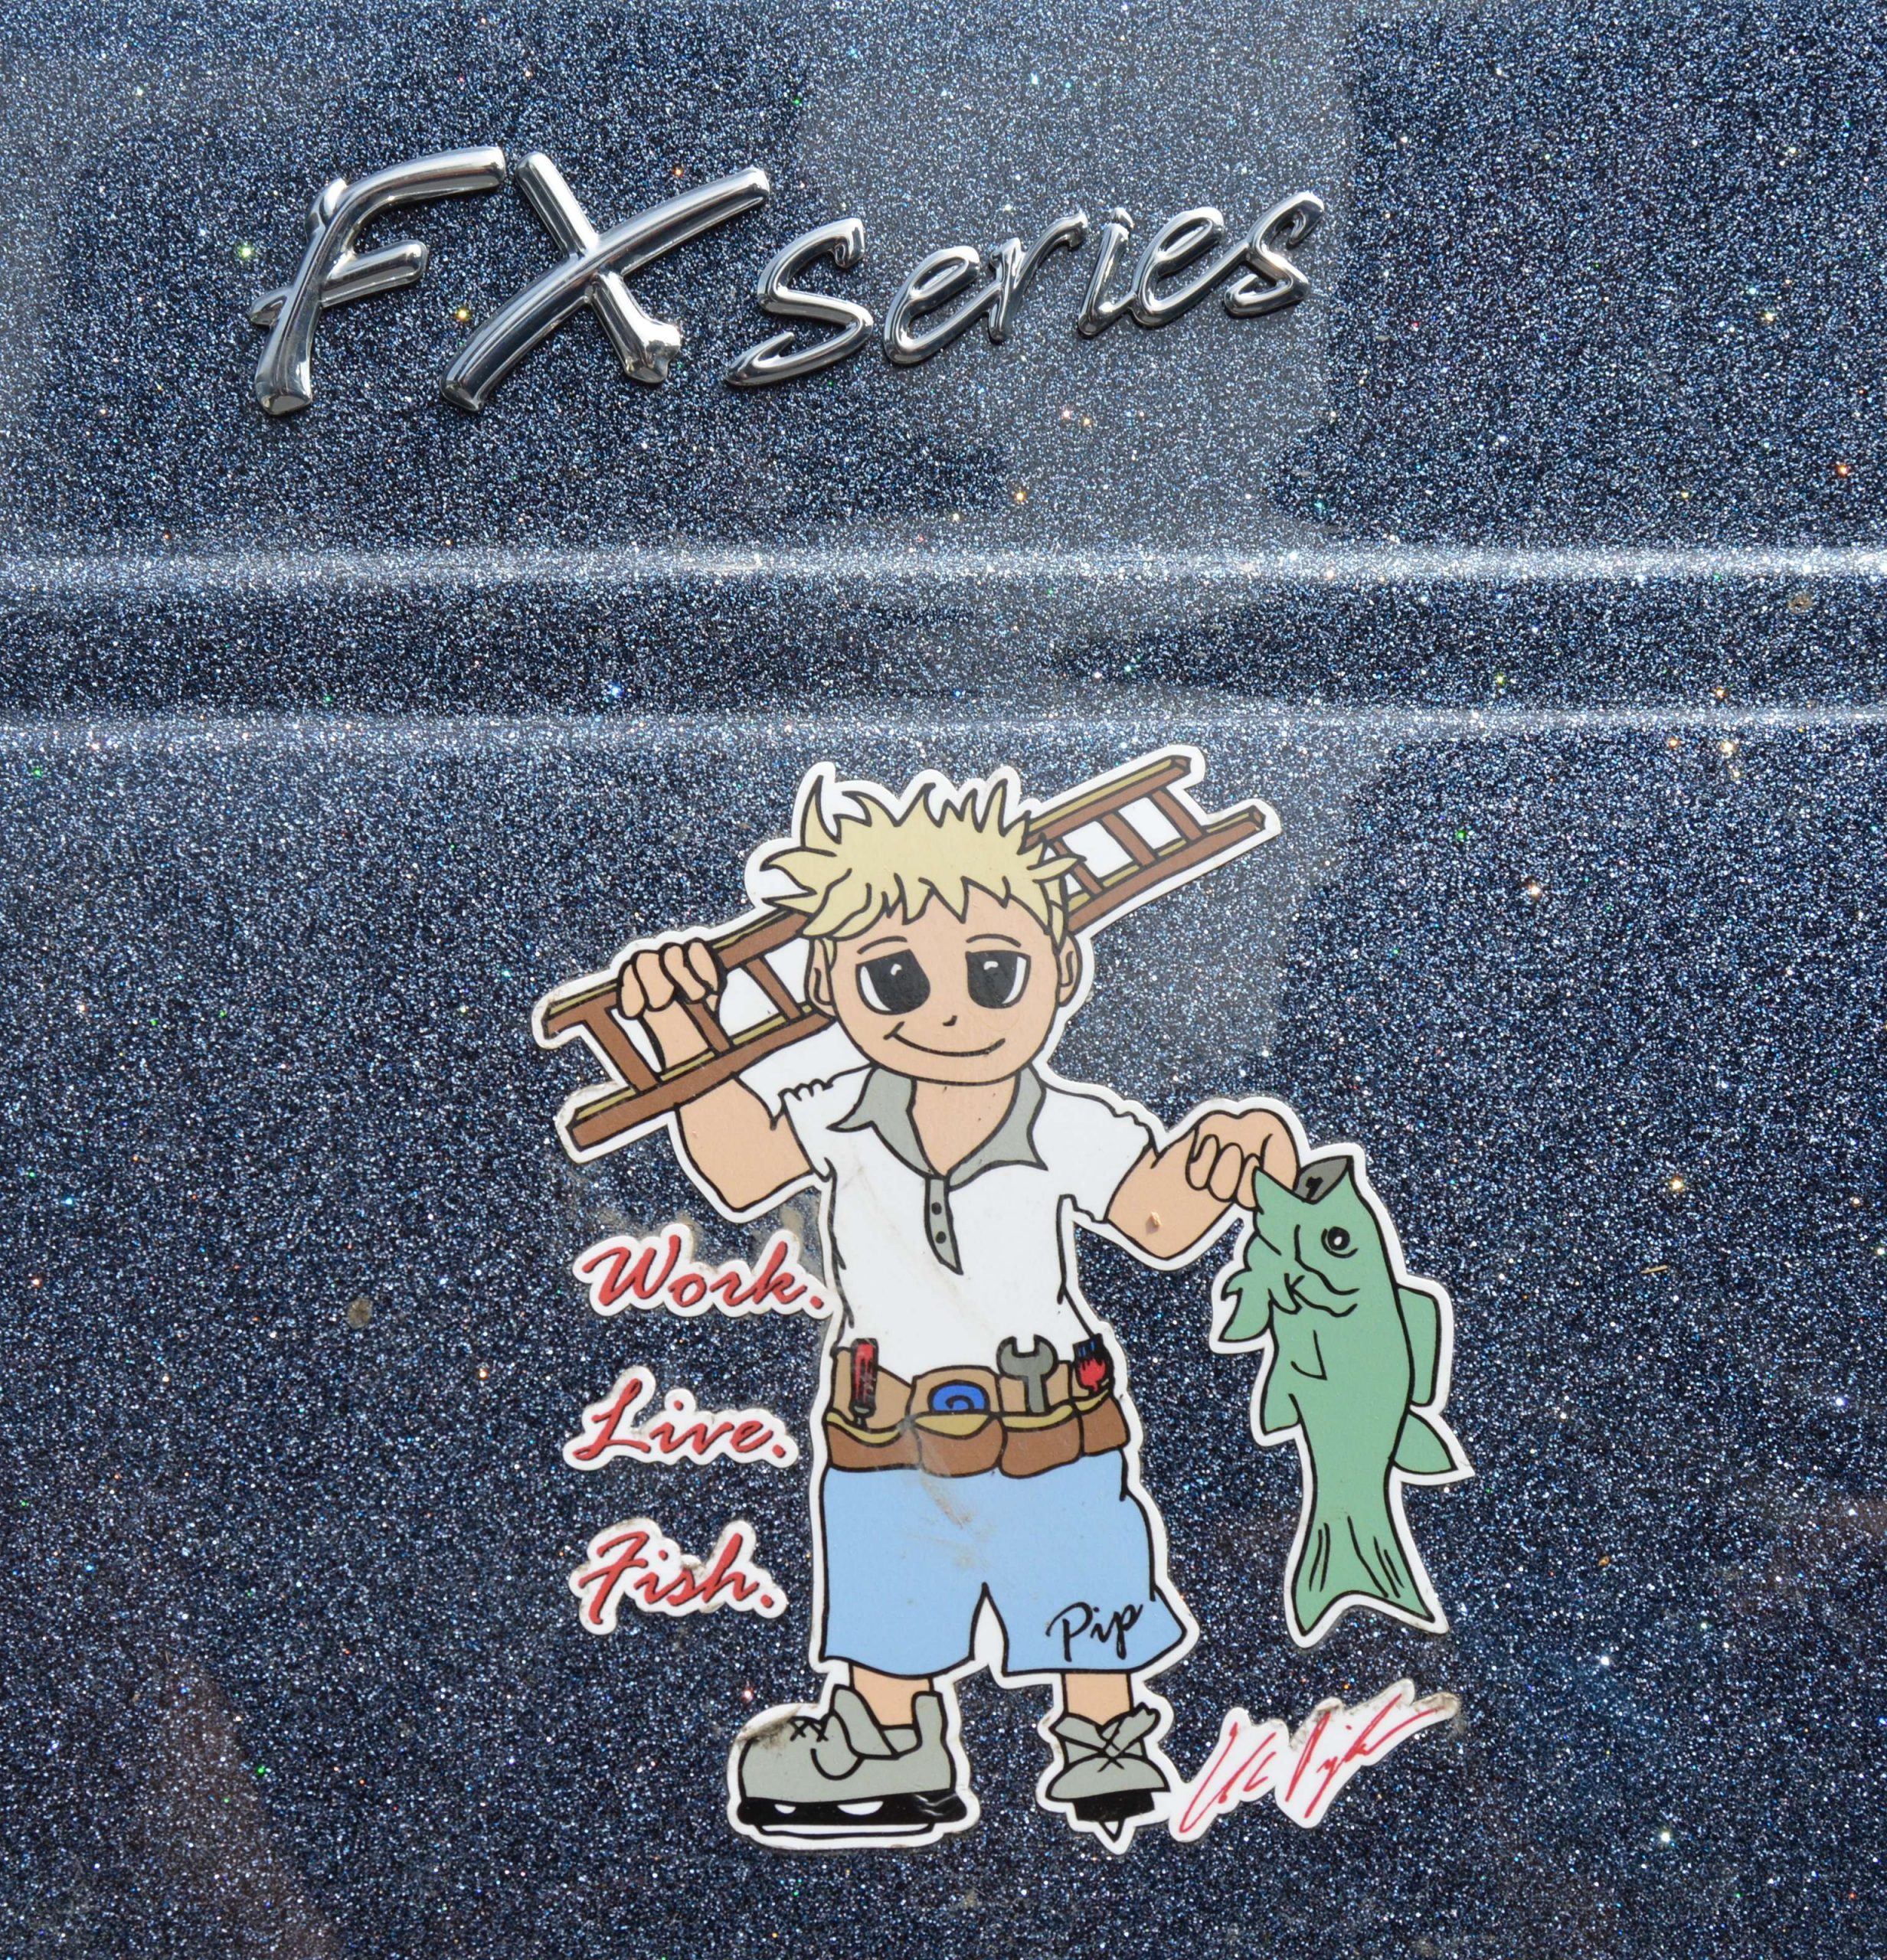 His boat has this decal, an avatar of Pipkens that shows off some of the major parts of his life: bass fishing, obviously; a ladder and tool belt to represent his house painting business back home in Michigan; and ice skates because he's an ice hockey referee on the side.